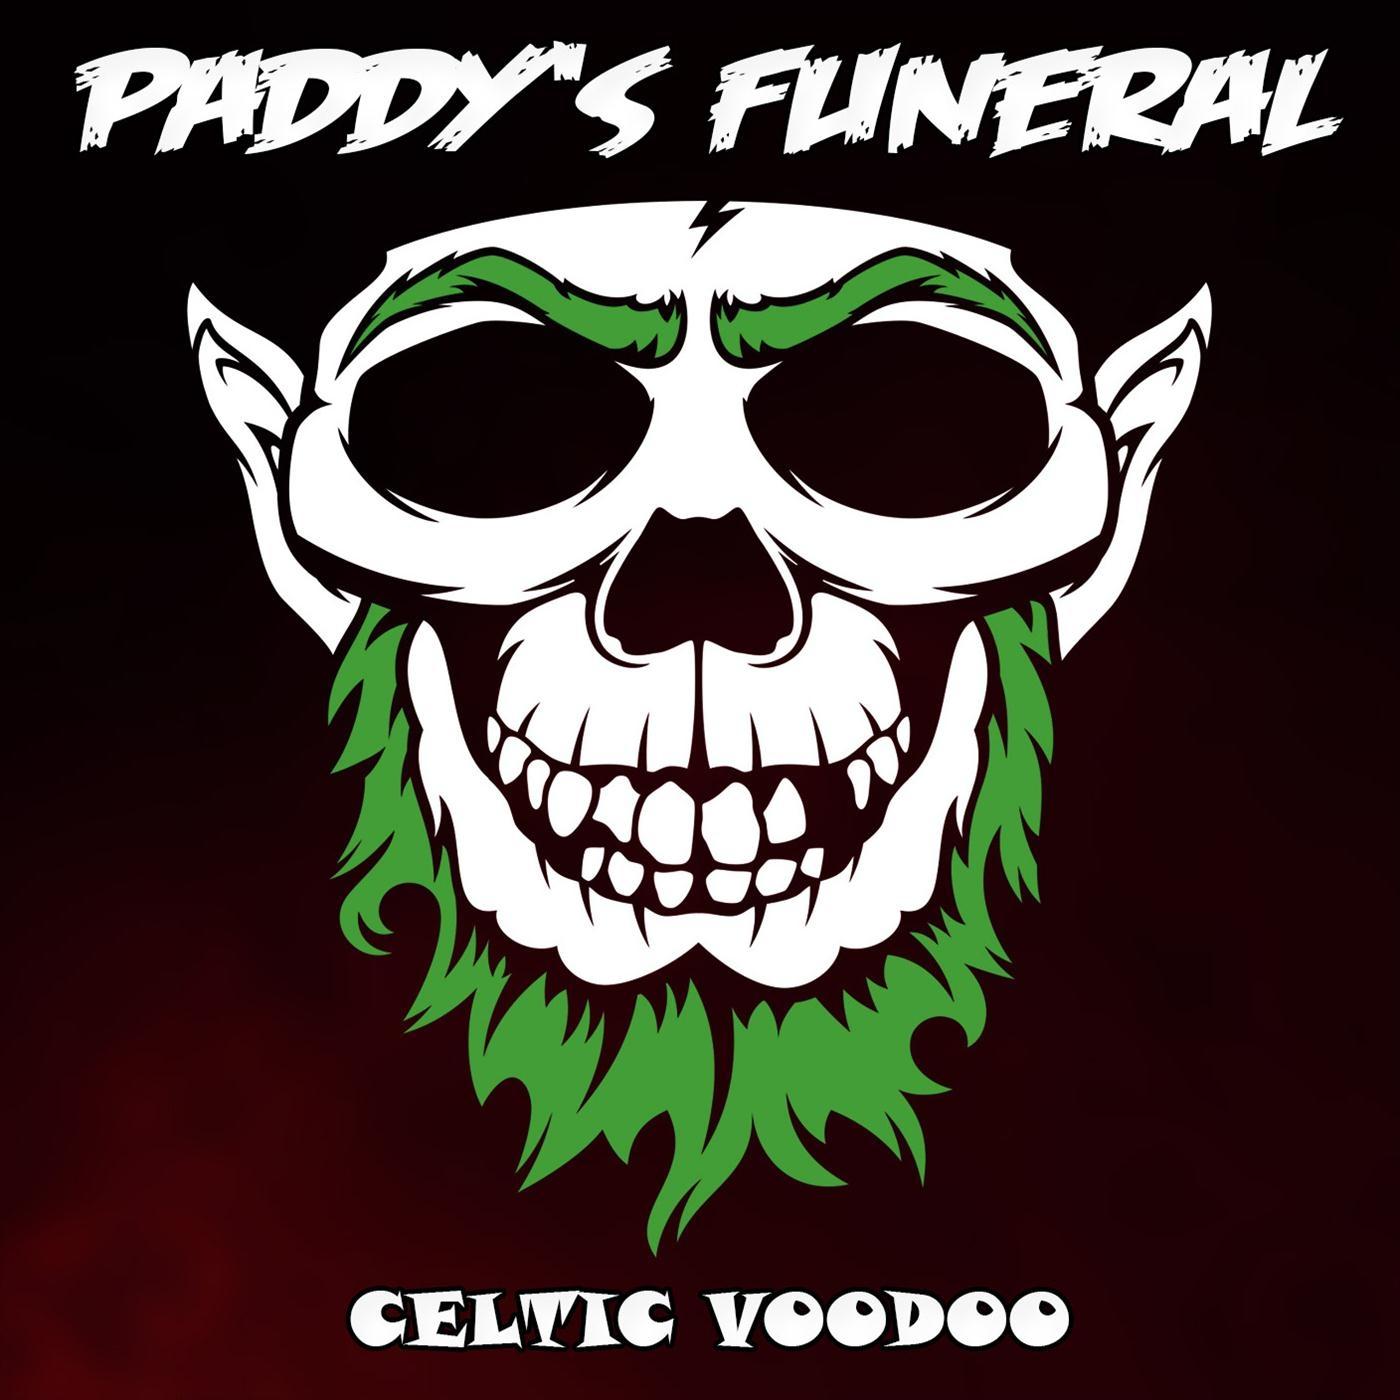 Paddy's Funeral - Celtic Voodoo Lady